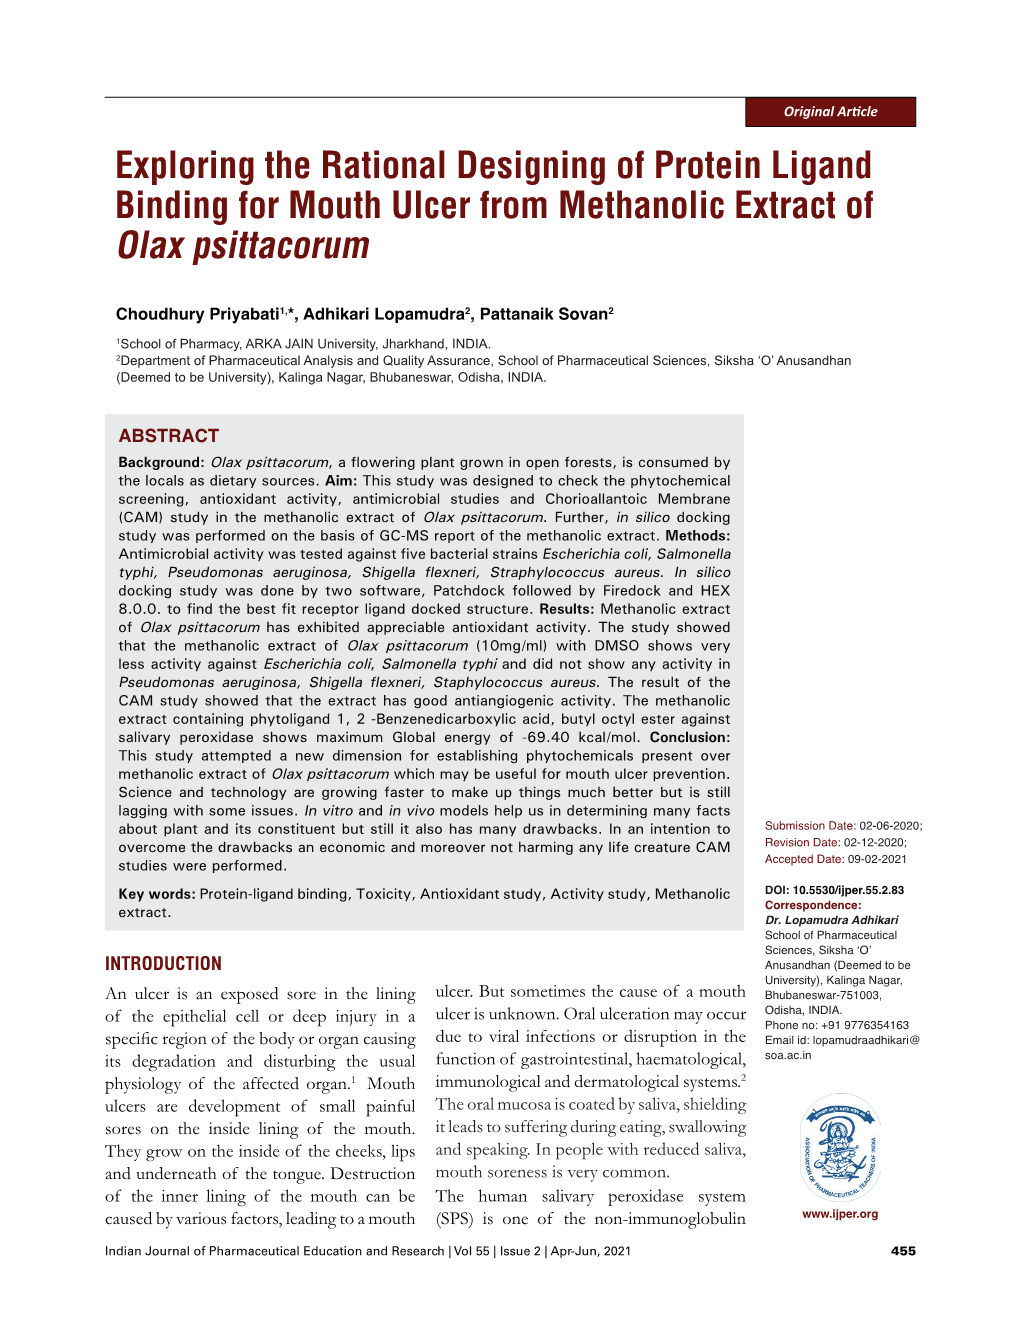 Exploring the Rational Designing of Protein Ligand Binding for Mouth Ulcer from Methanolic Extract of Olax Psittacorum